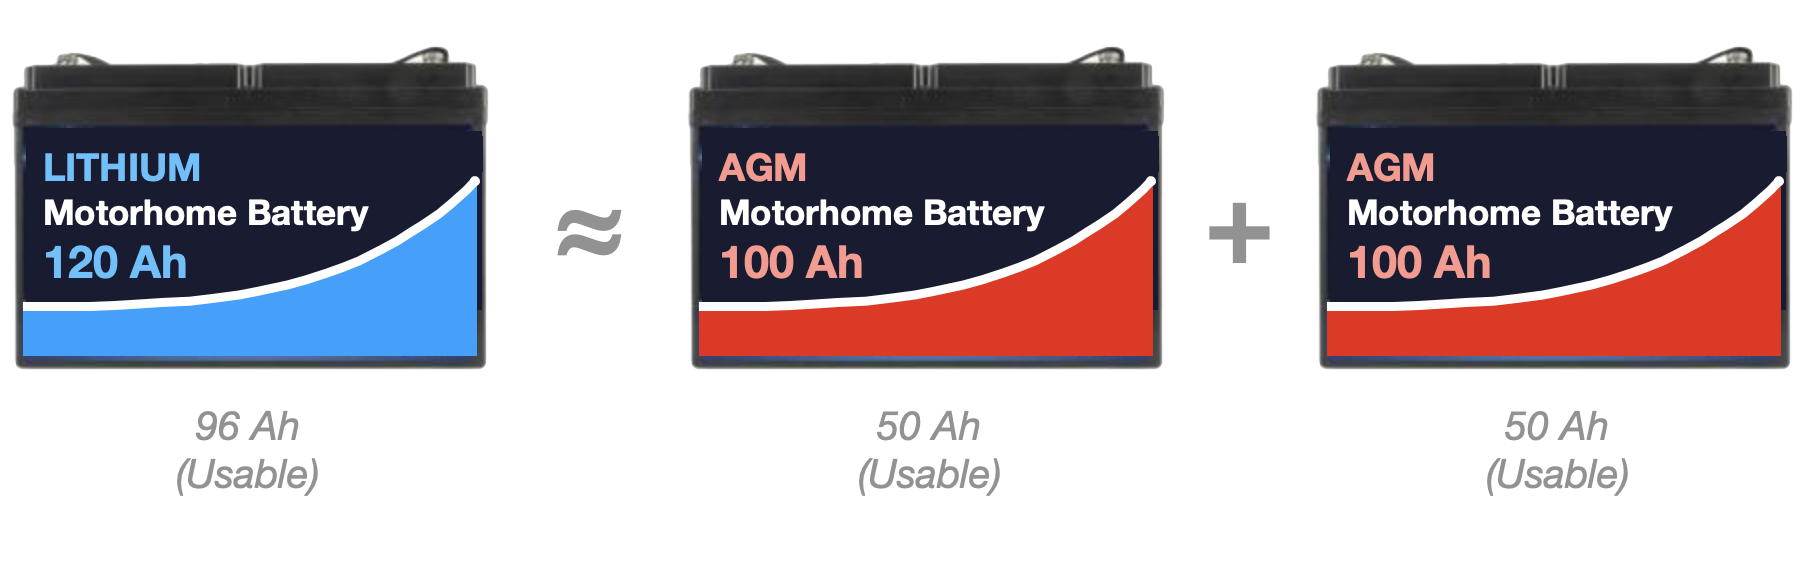 Lithium battery equals two AGM batteries